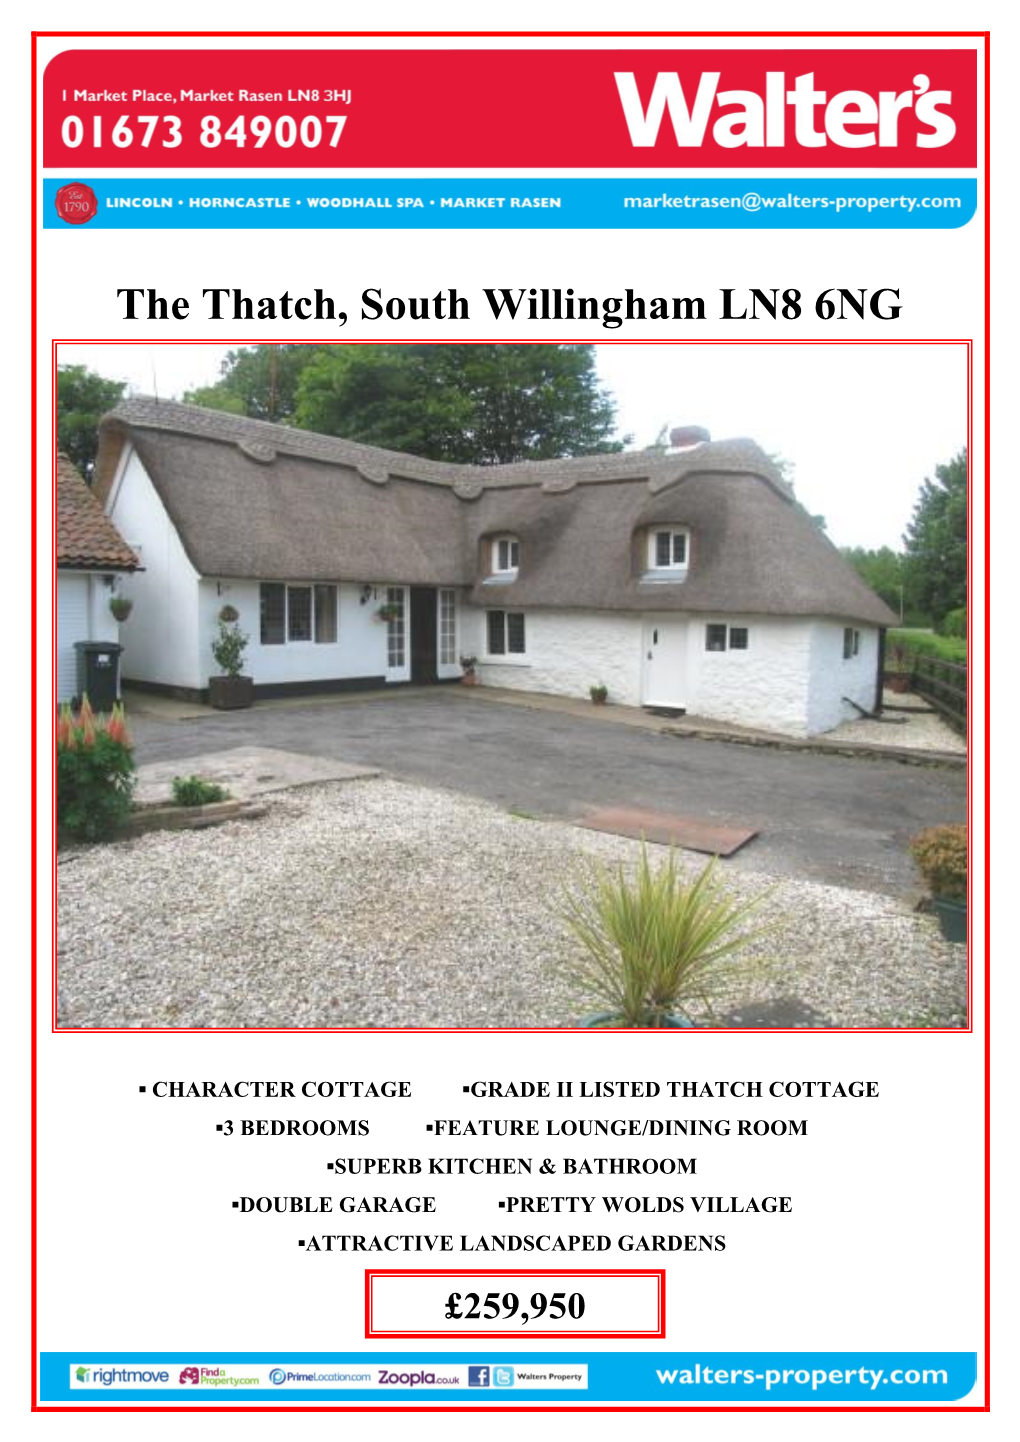 The Thatch, South Willingham LN8 6NG